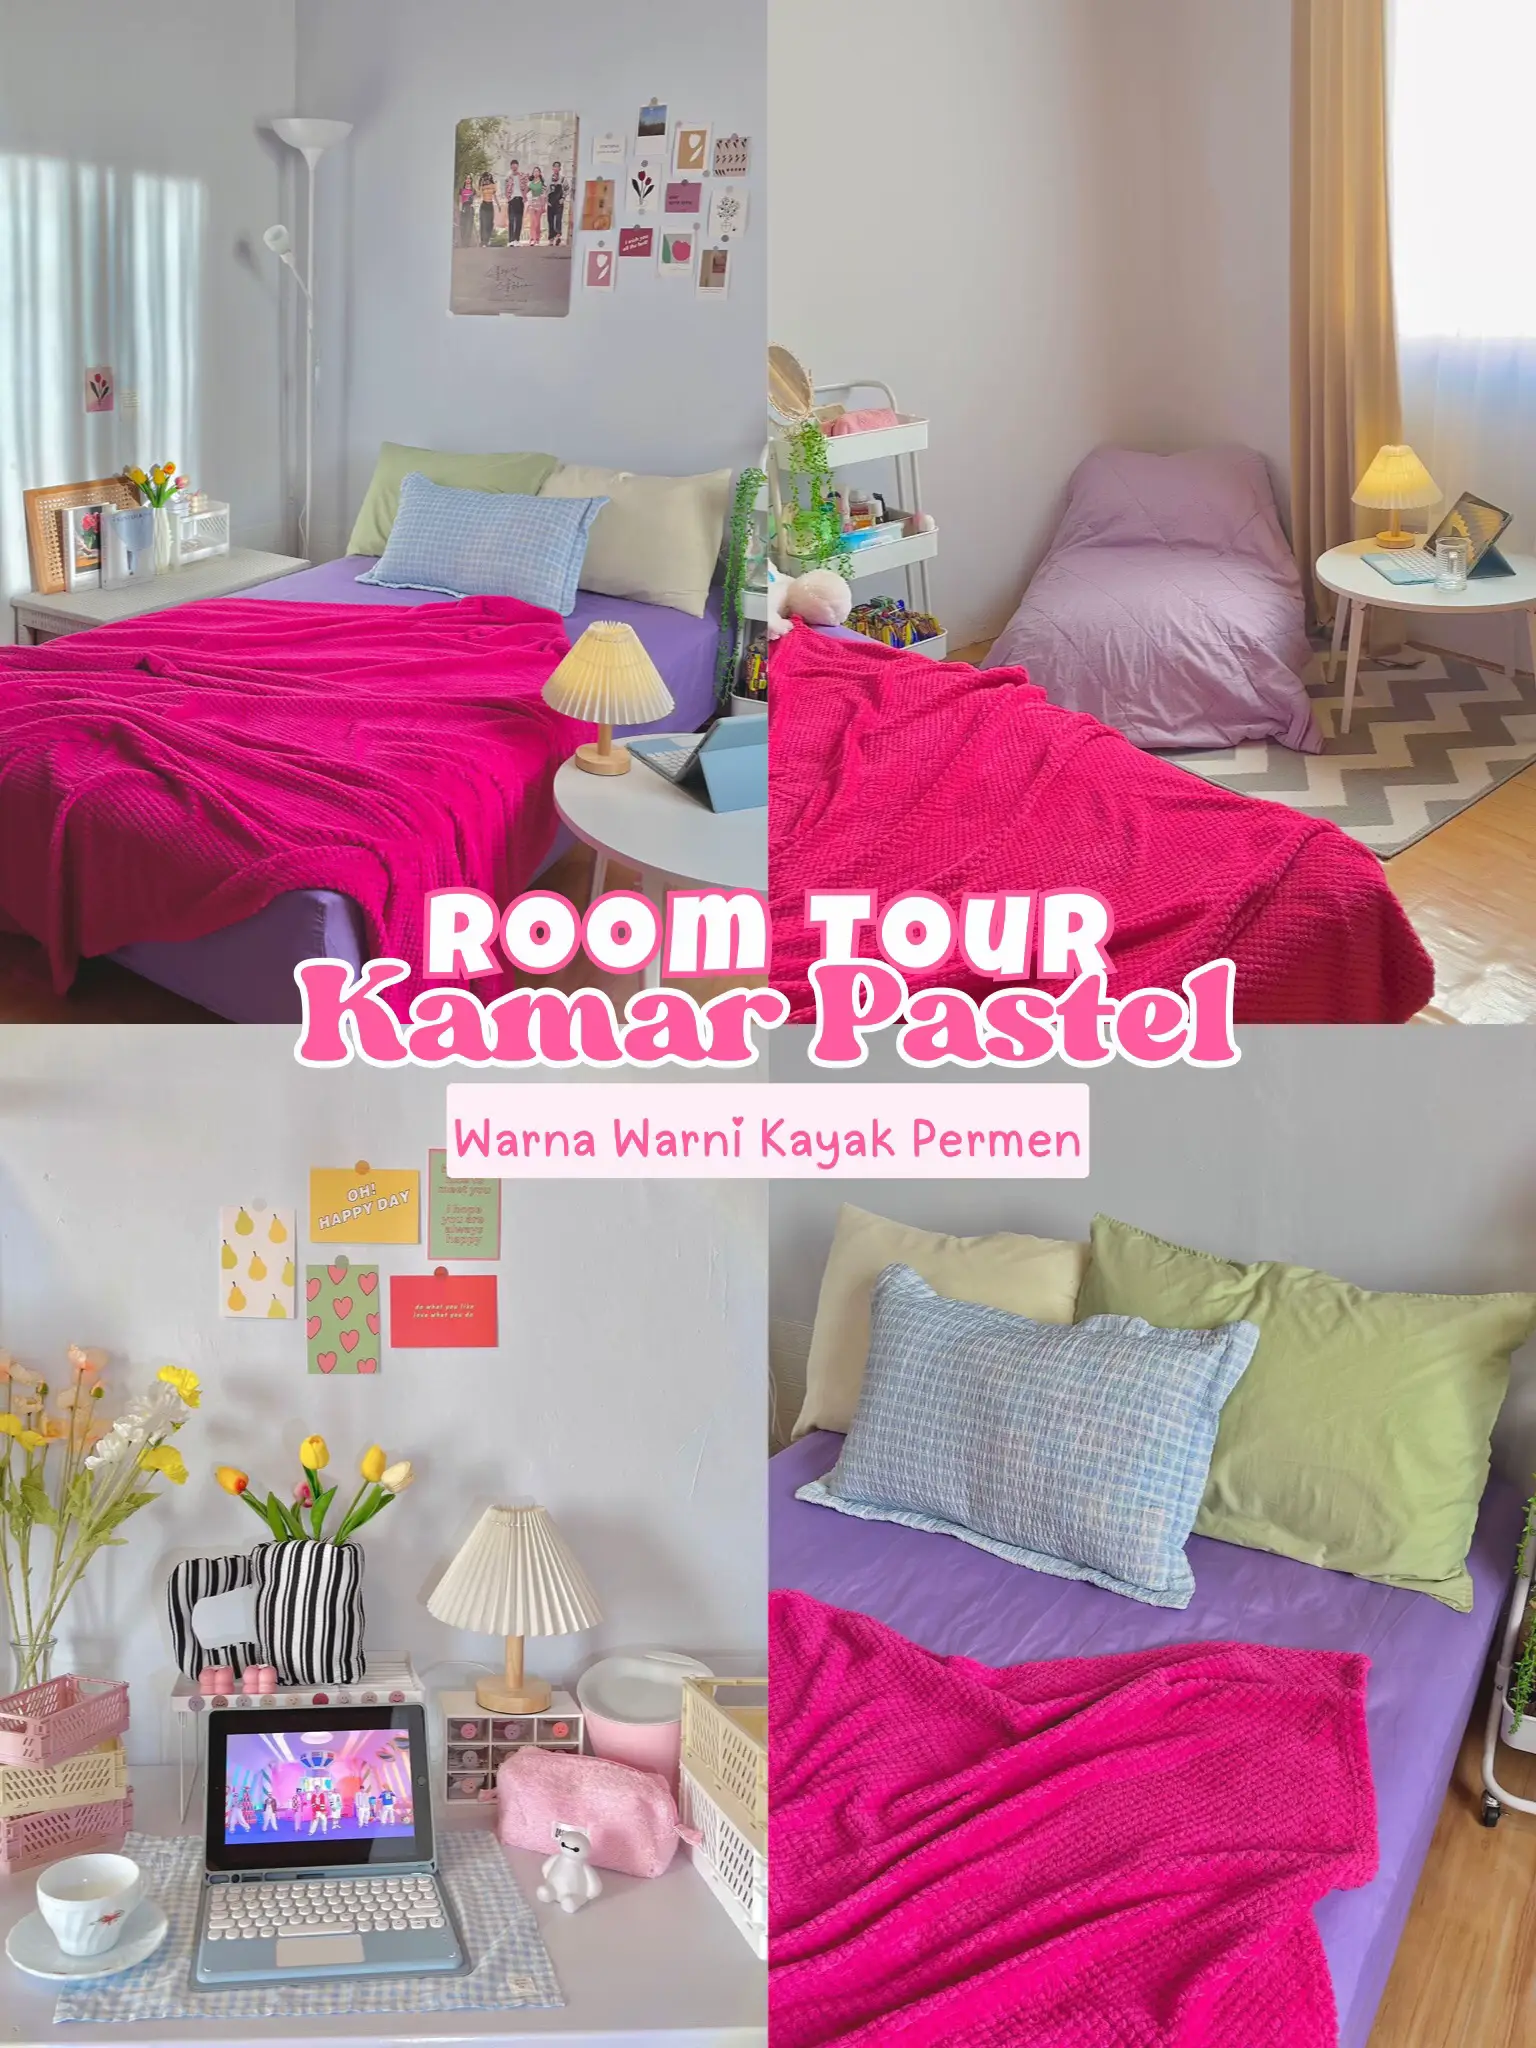 Room Tour Kamar Pastel💜💛💗, Gallery posted by zra_.room